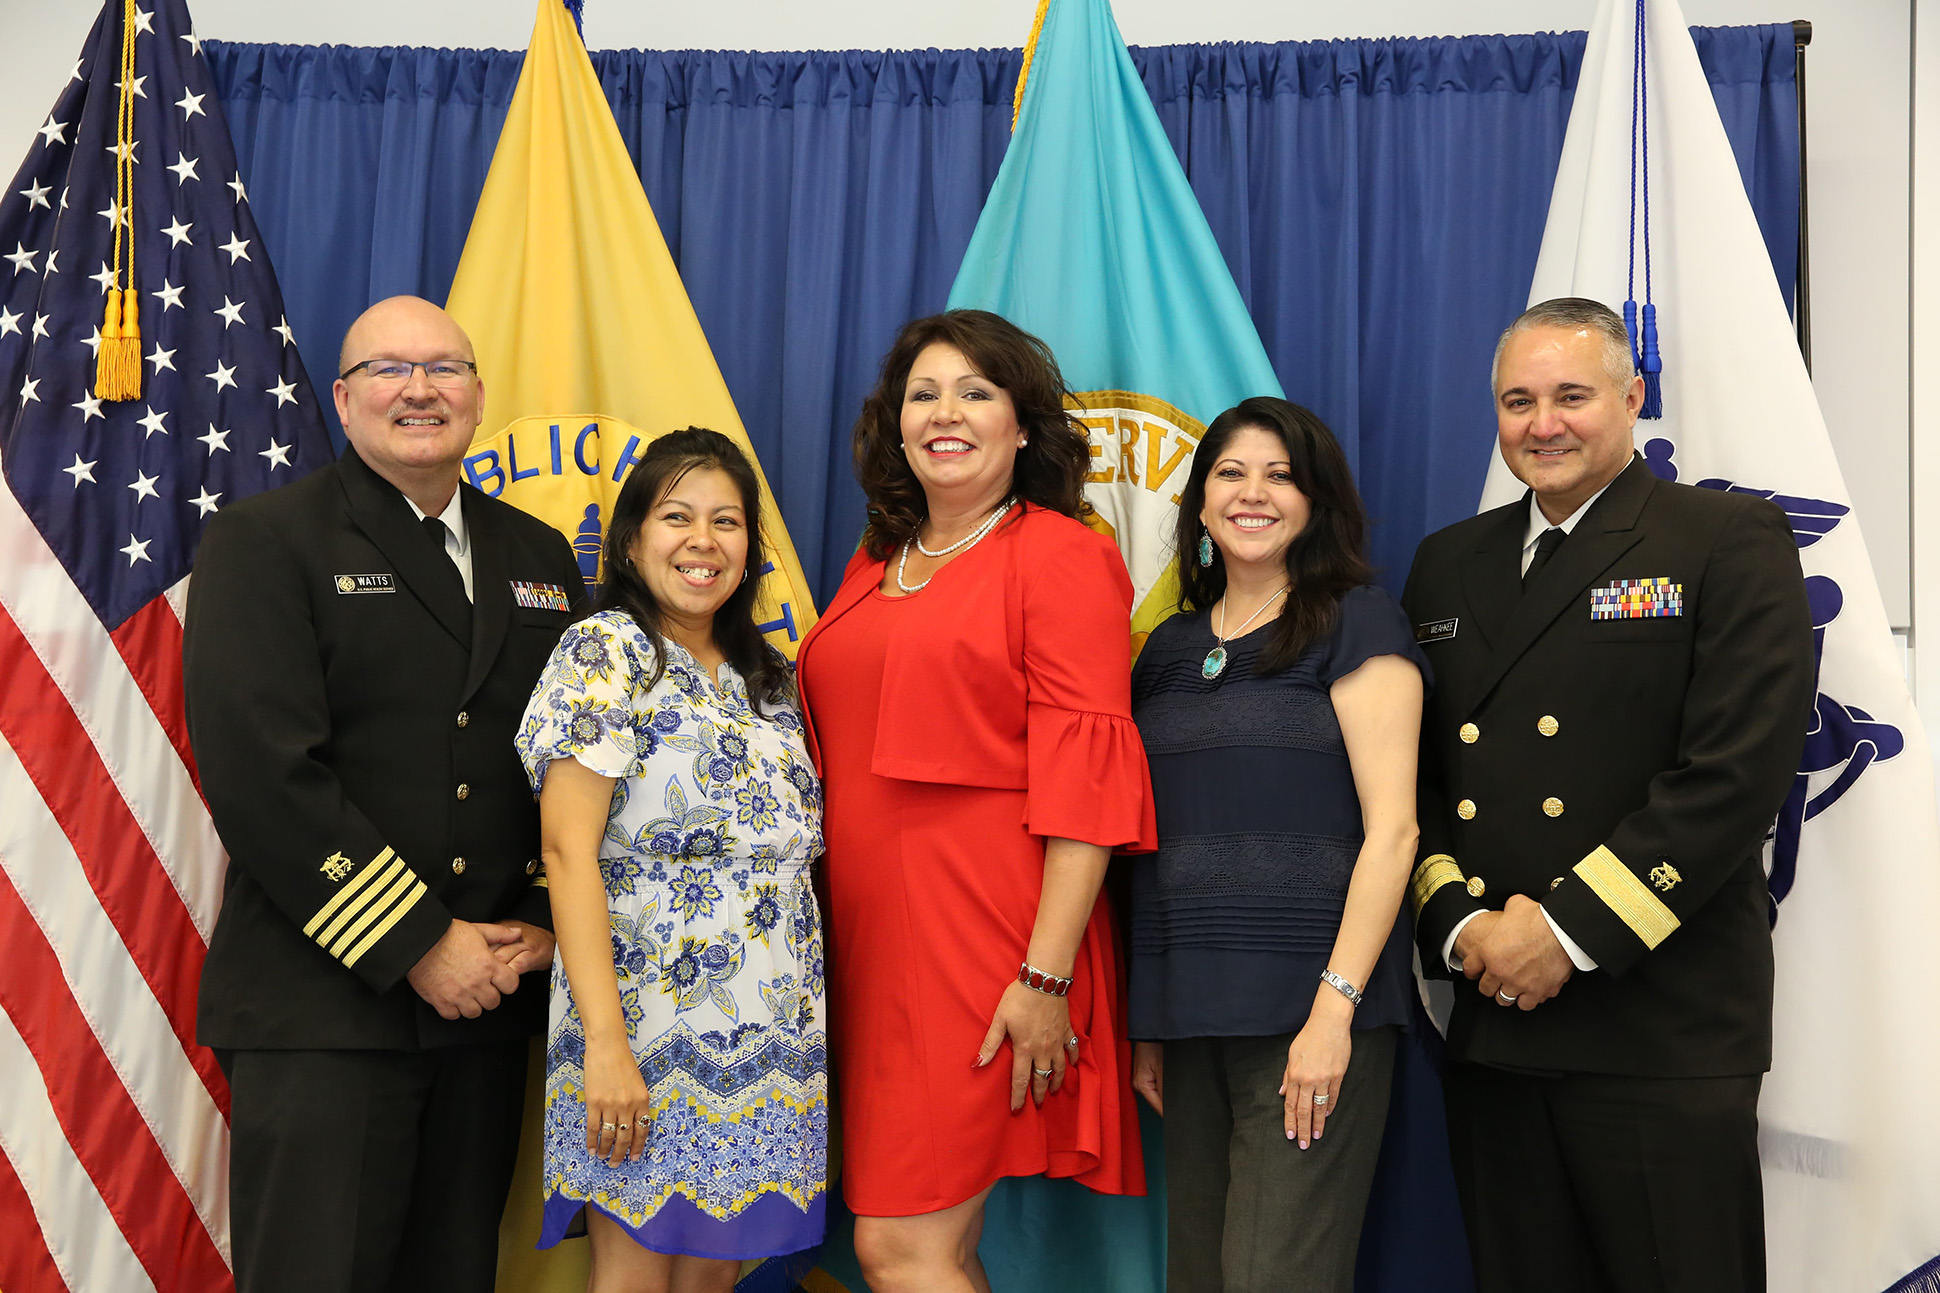 Group Photos - CAPT Travis Watts, Jacquie Folsom, Angela Young, Rose Weahkee, RADM Michael Weahkee